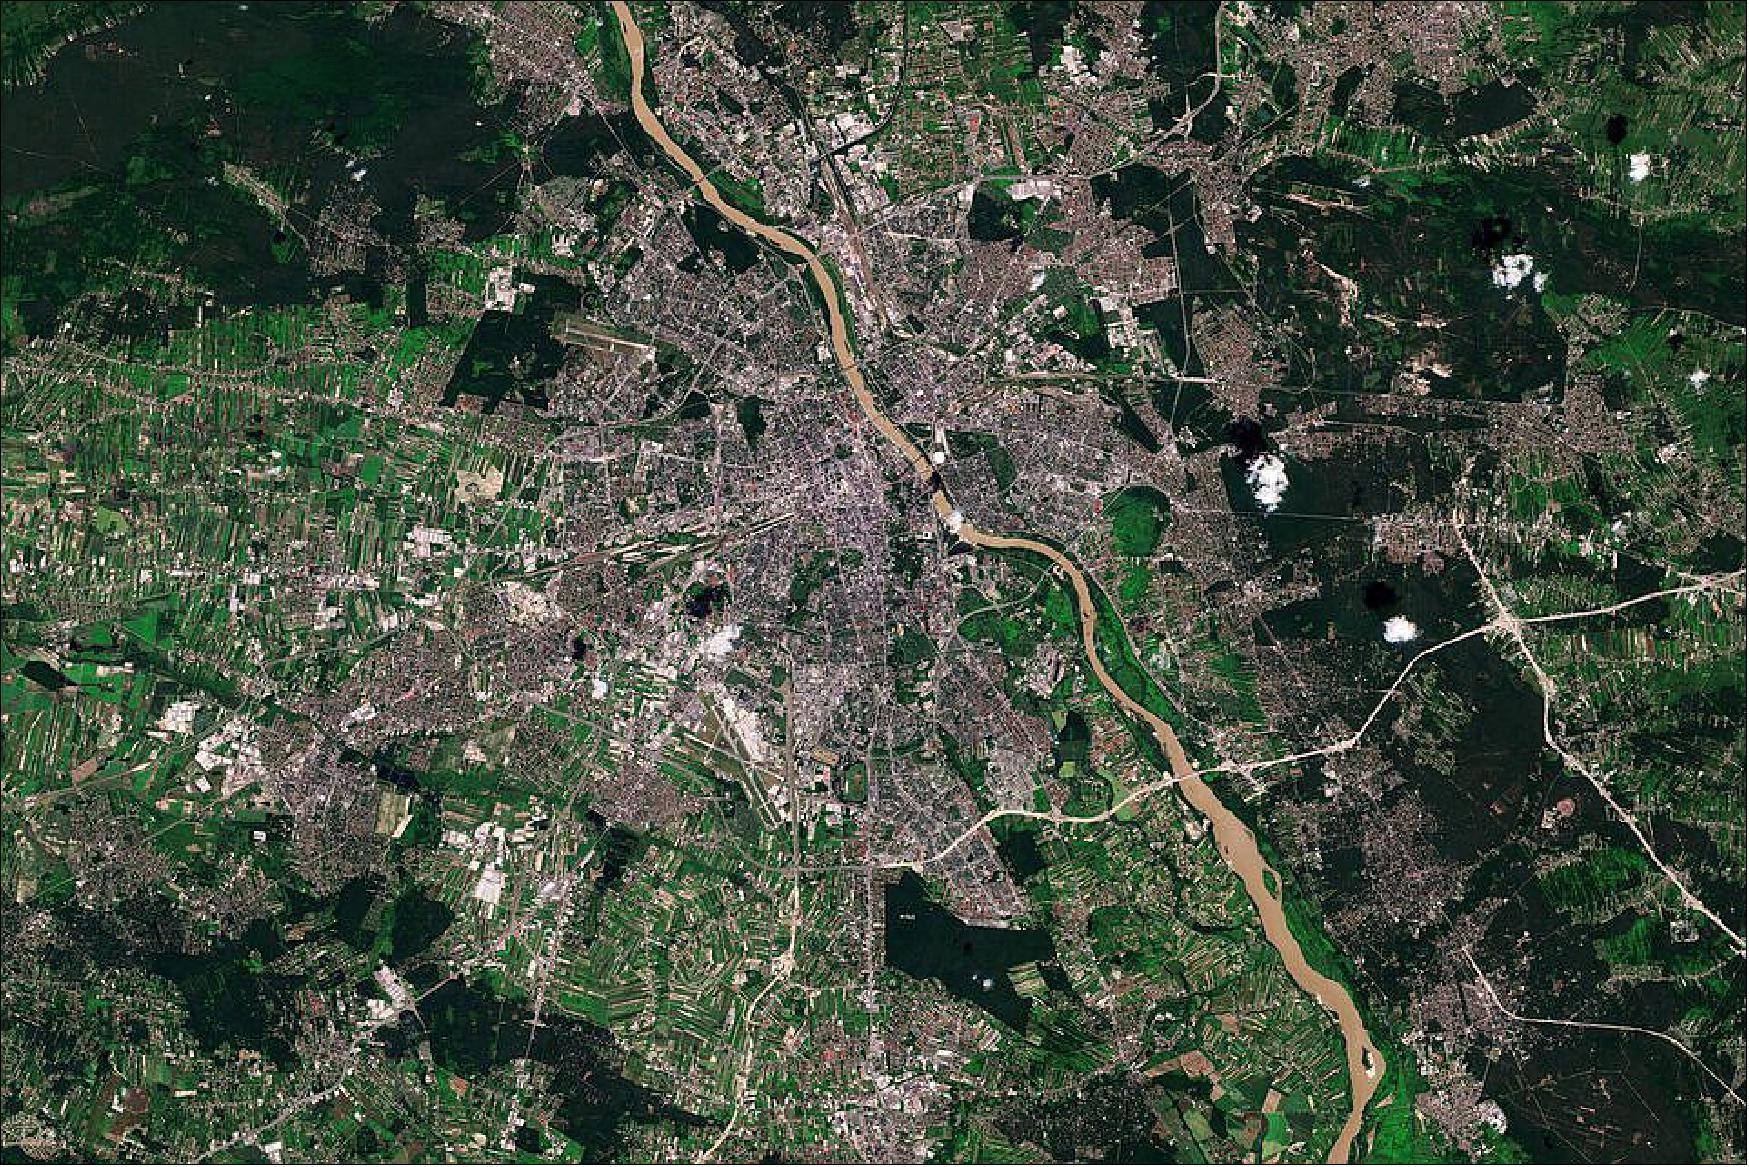 Figure 41: Located in east-central Poland, Warsaw lies in the heartland of the Masovian Plain, around 280 km from the Baltic coastal city of Gdańsk. The city saw more than 85% of its buildings destroyed during World War II, yet, despite its hardships, Warsaw has risen from the ashes – earning itself the nickname 'Phoenix City.' This image, acquired on 1 July 2020, is also featured on the Earth from Space video program (image credit: ESA, the image contains modified Copernicus Sentinel data (2020), processed by ESA, CC BY-SA 3.0 IGO)